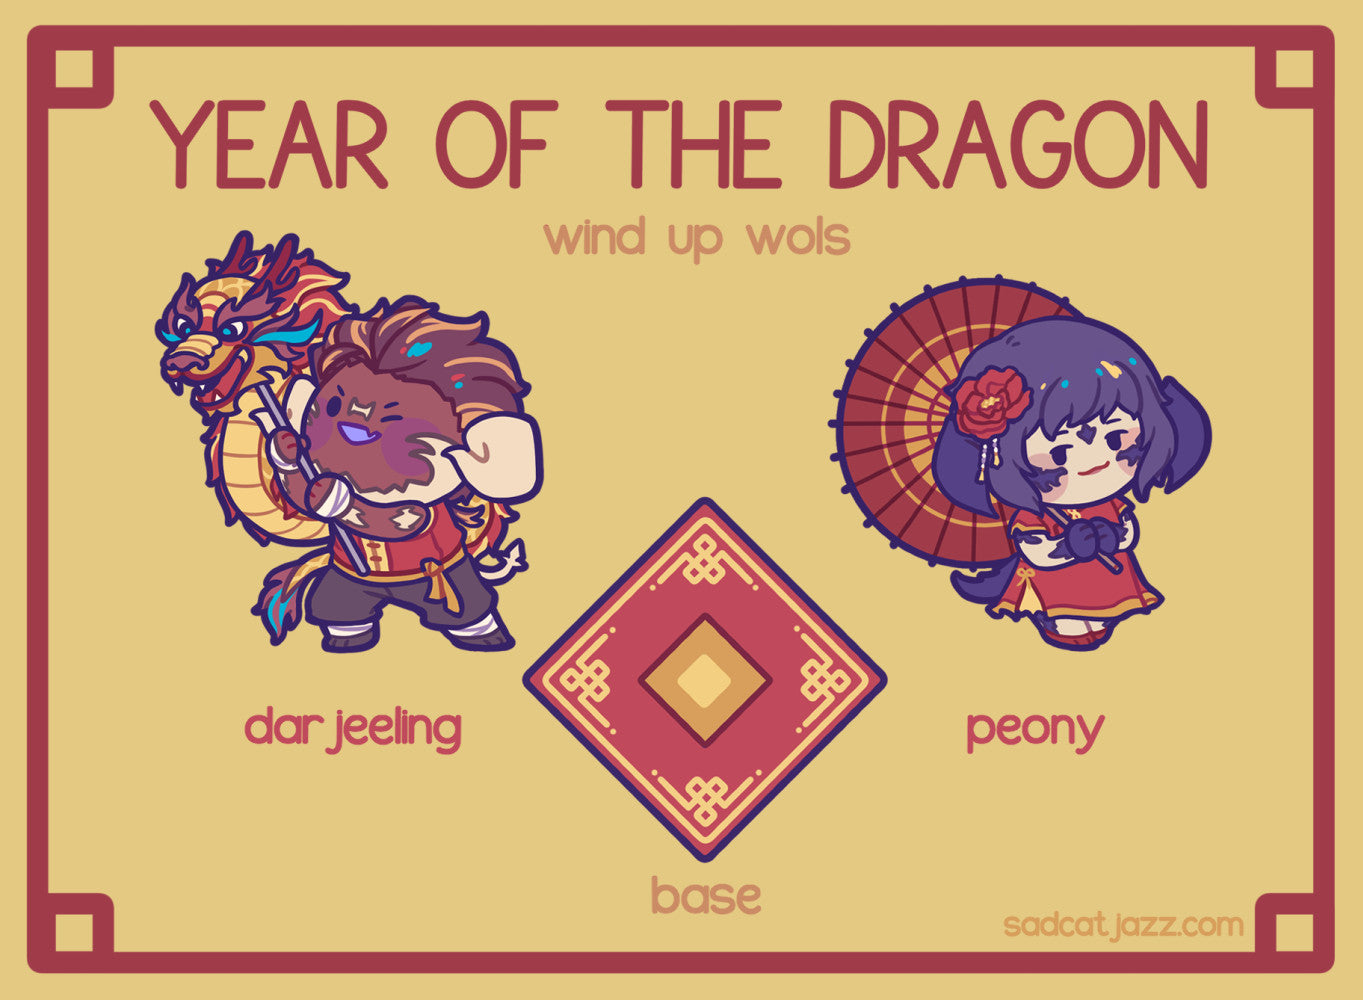 [PREORDER] FFXIV: Year of the Dragon Wind-Up WoLs